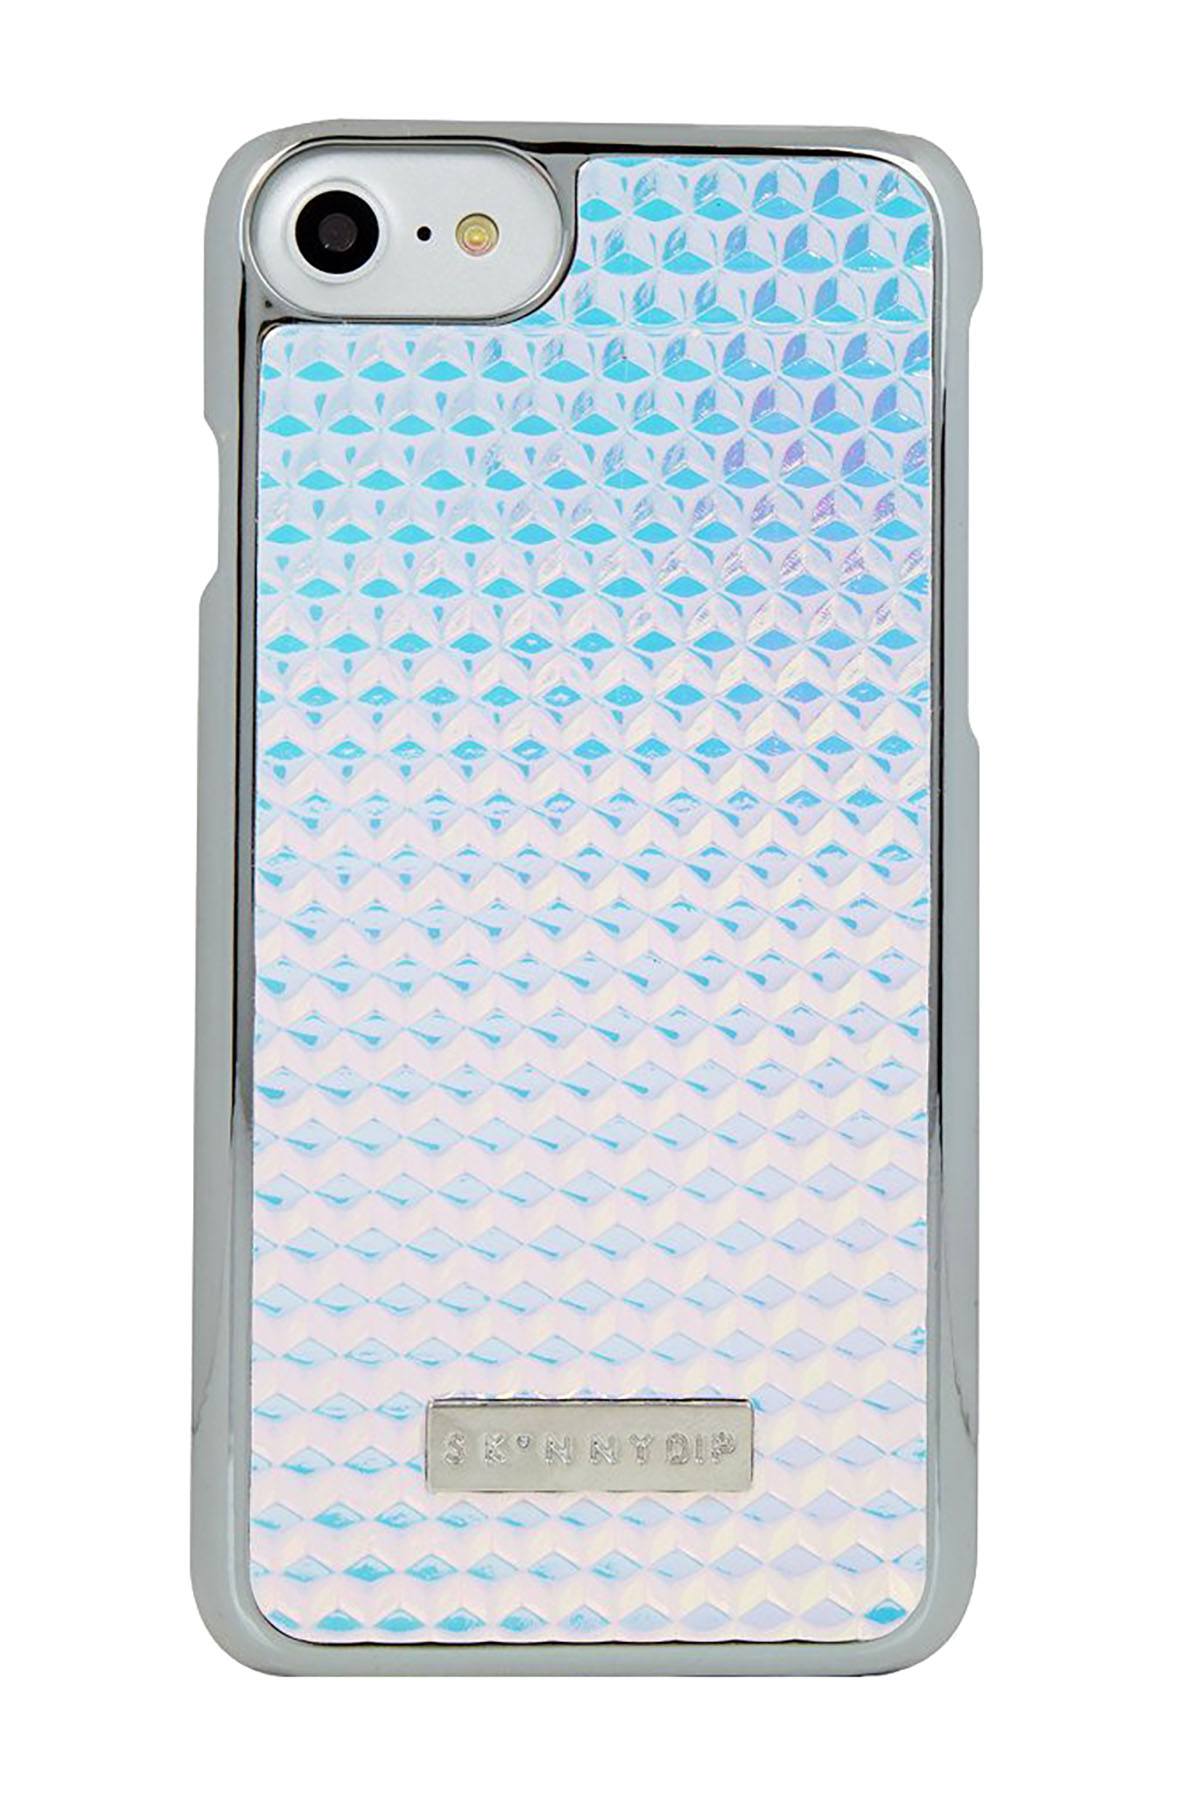 Skinnydip London Holographic Druzy iPhone Case + Screen Protector